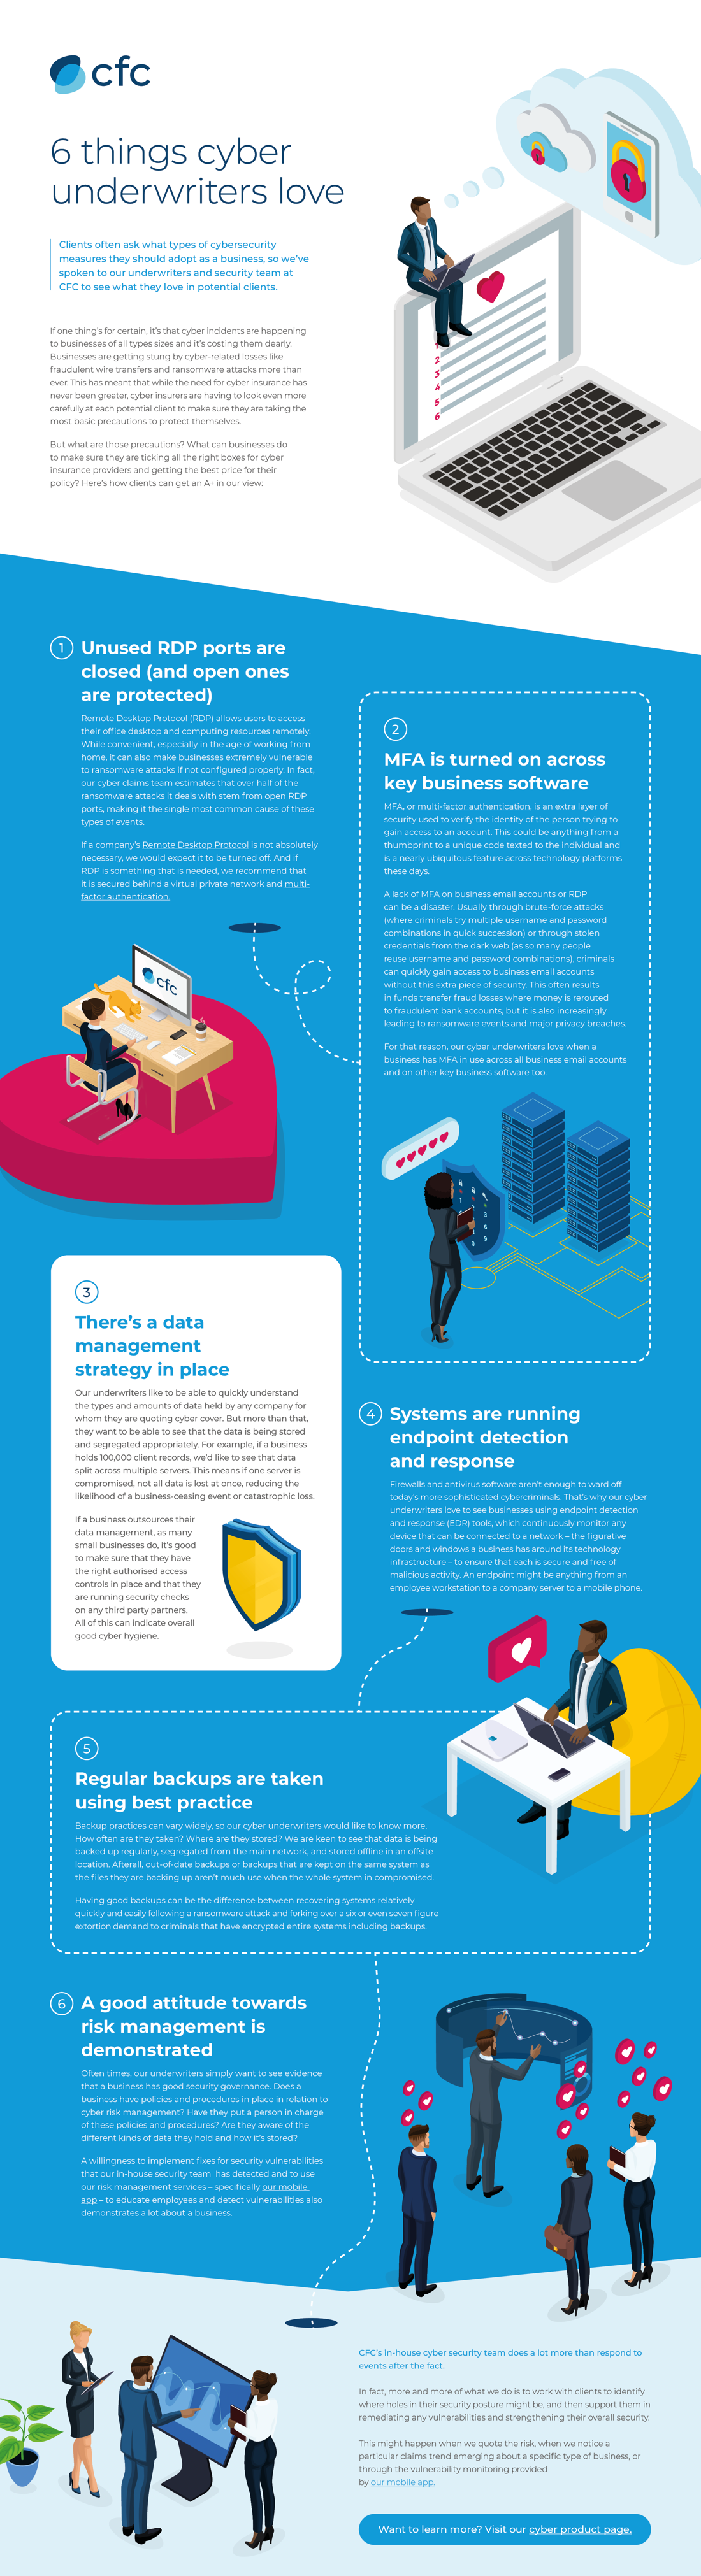 6 things cyber underwriters love infographic